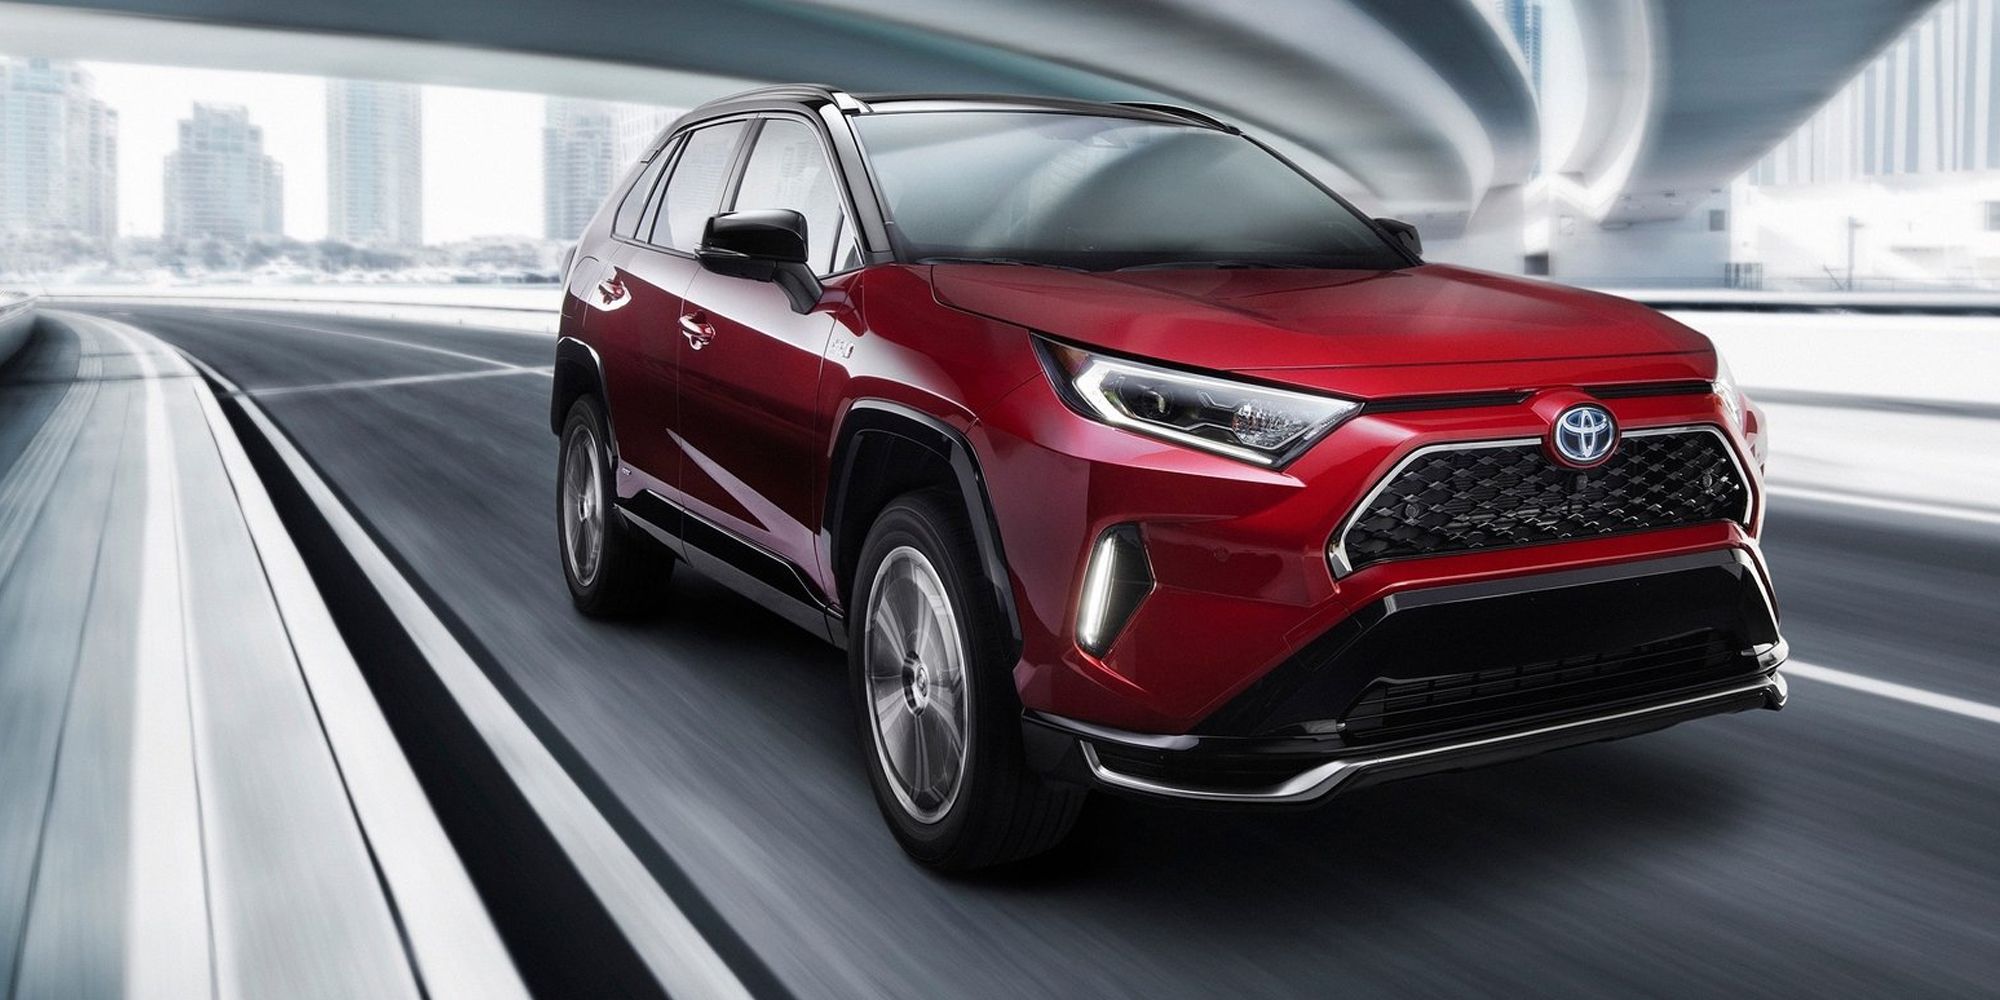 The front of a red RAV4 Prime on the move